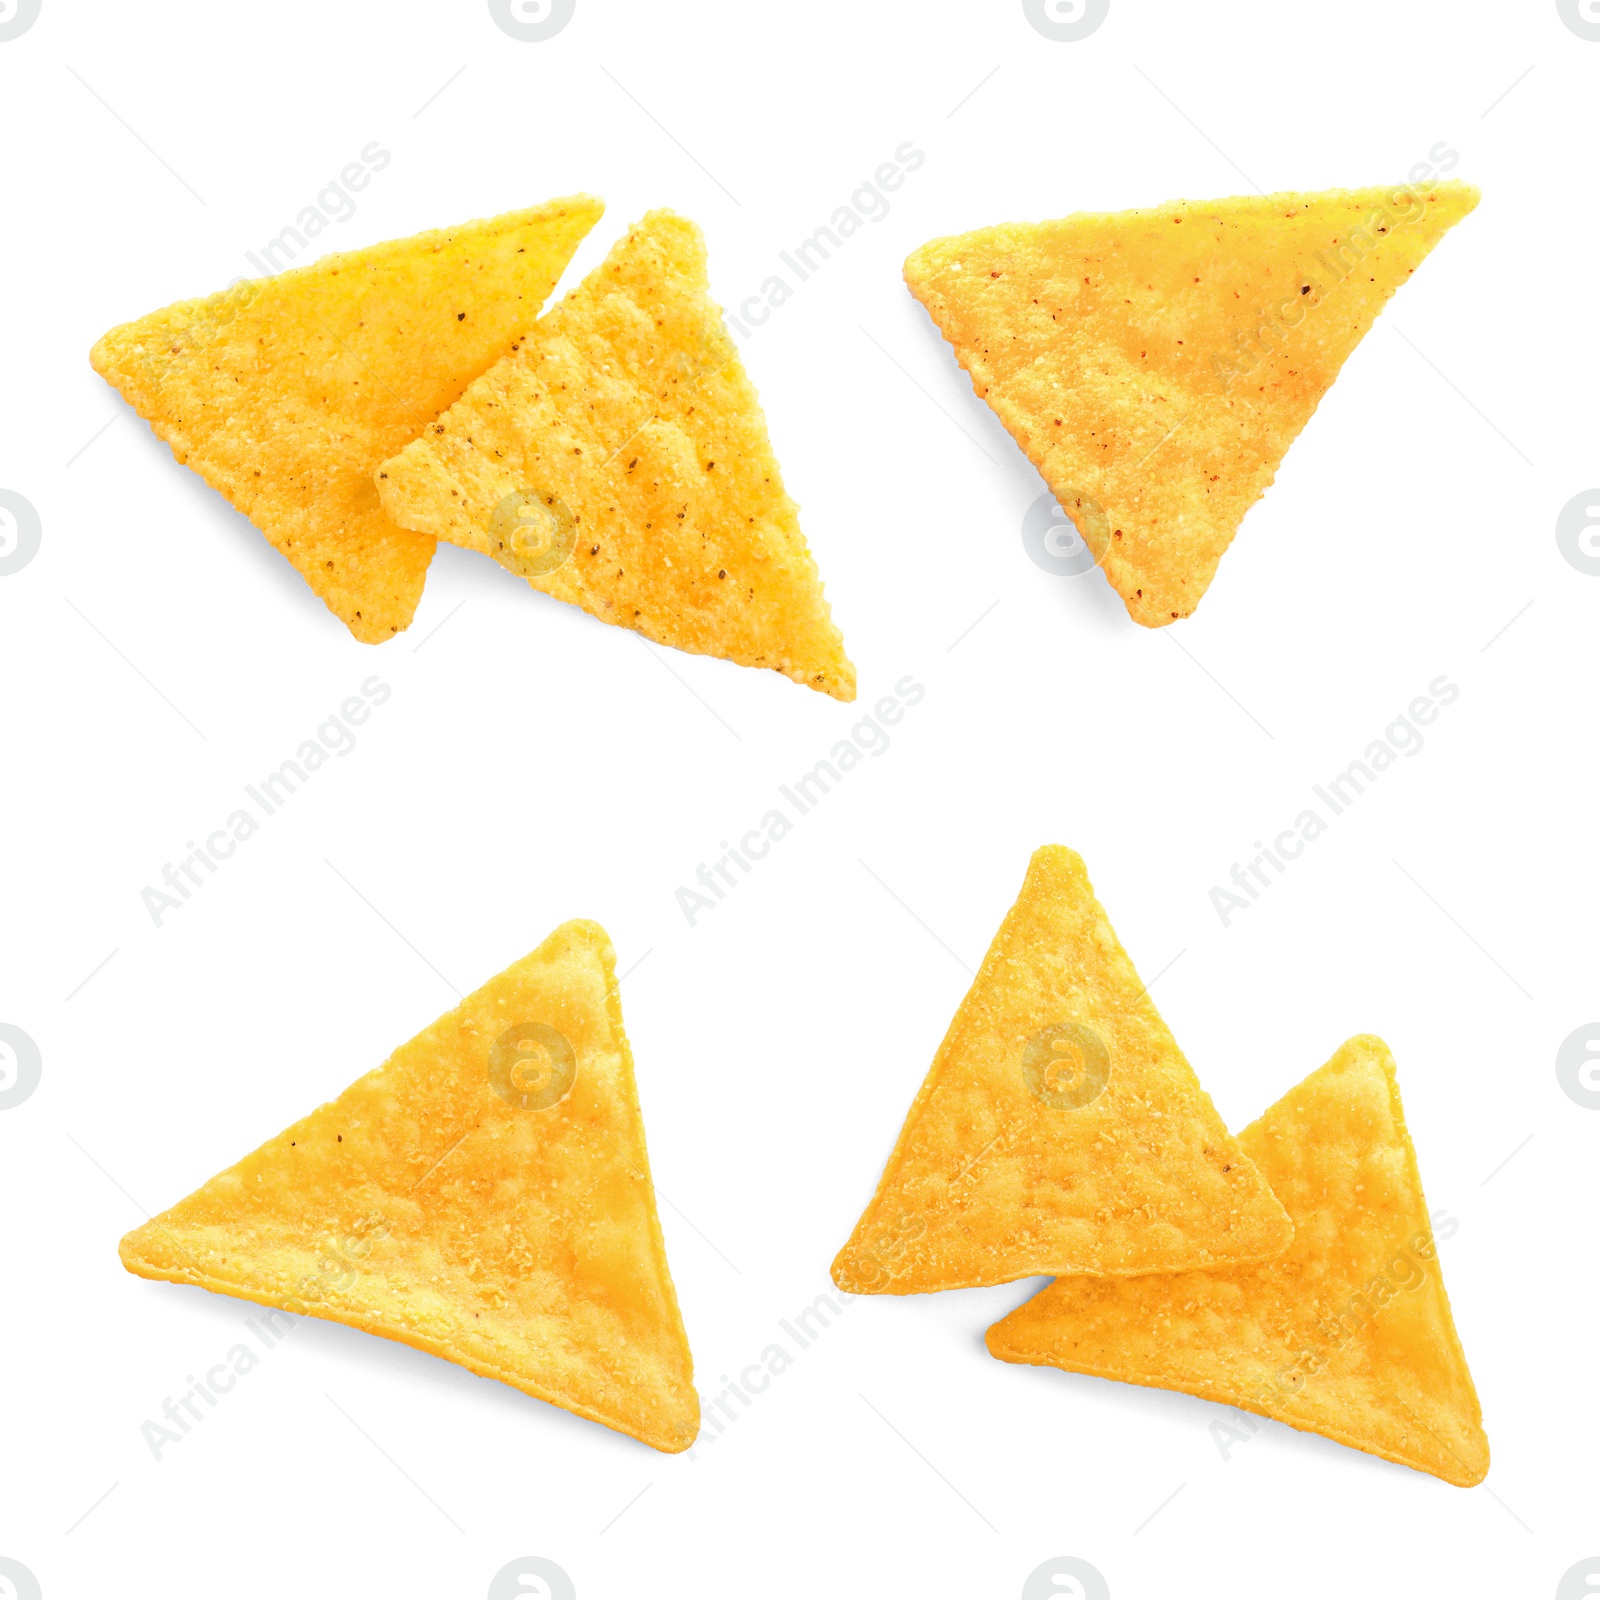 Image of Set with tasty tortilla chips (nachos) on white background, top view